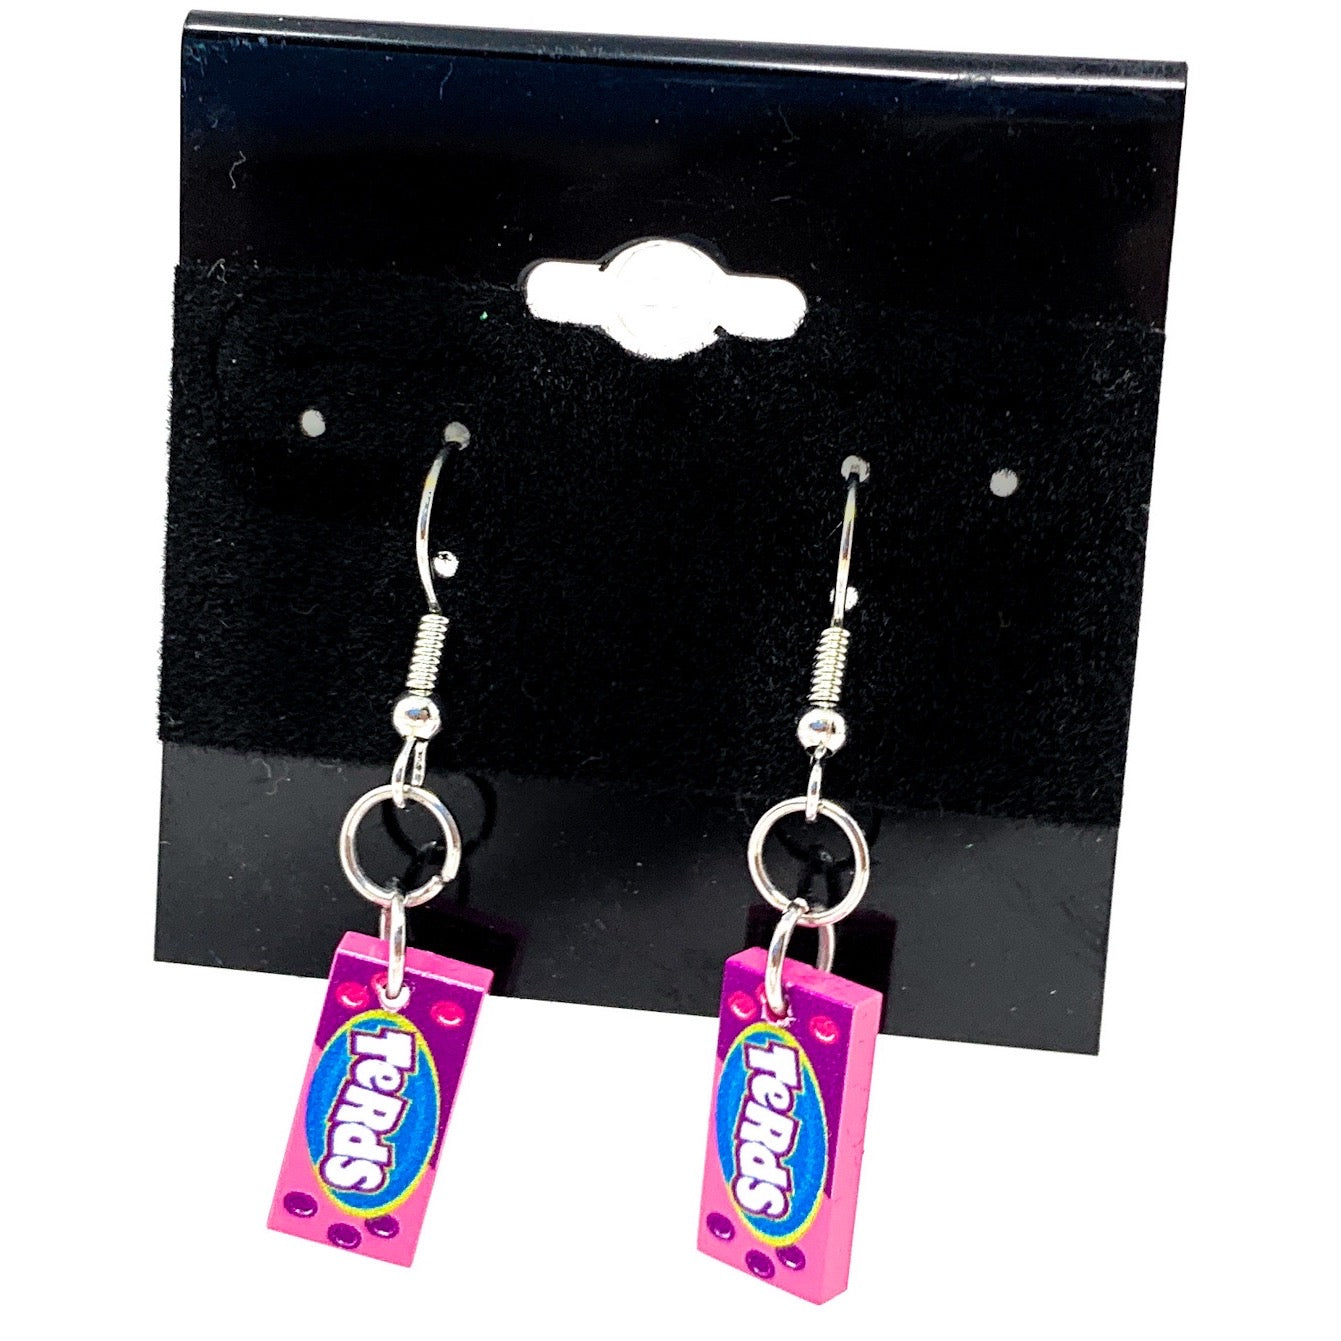 Terds Candy Earrings made from LEGO Bricks - B3 Customs